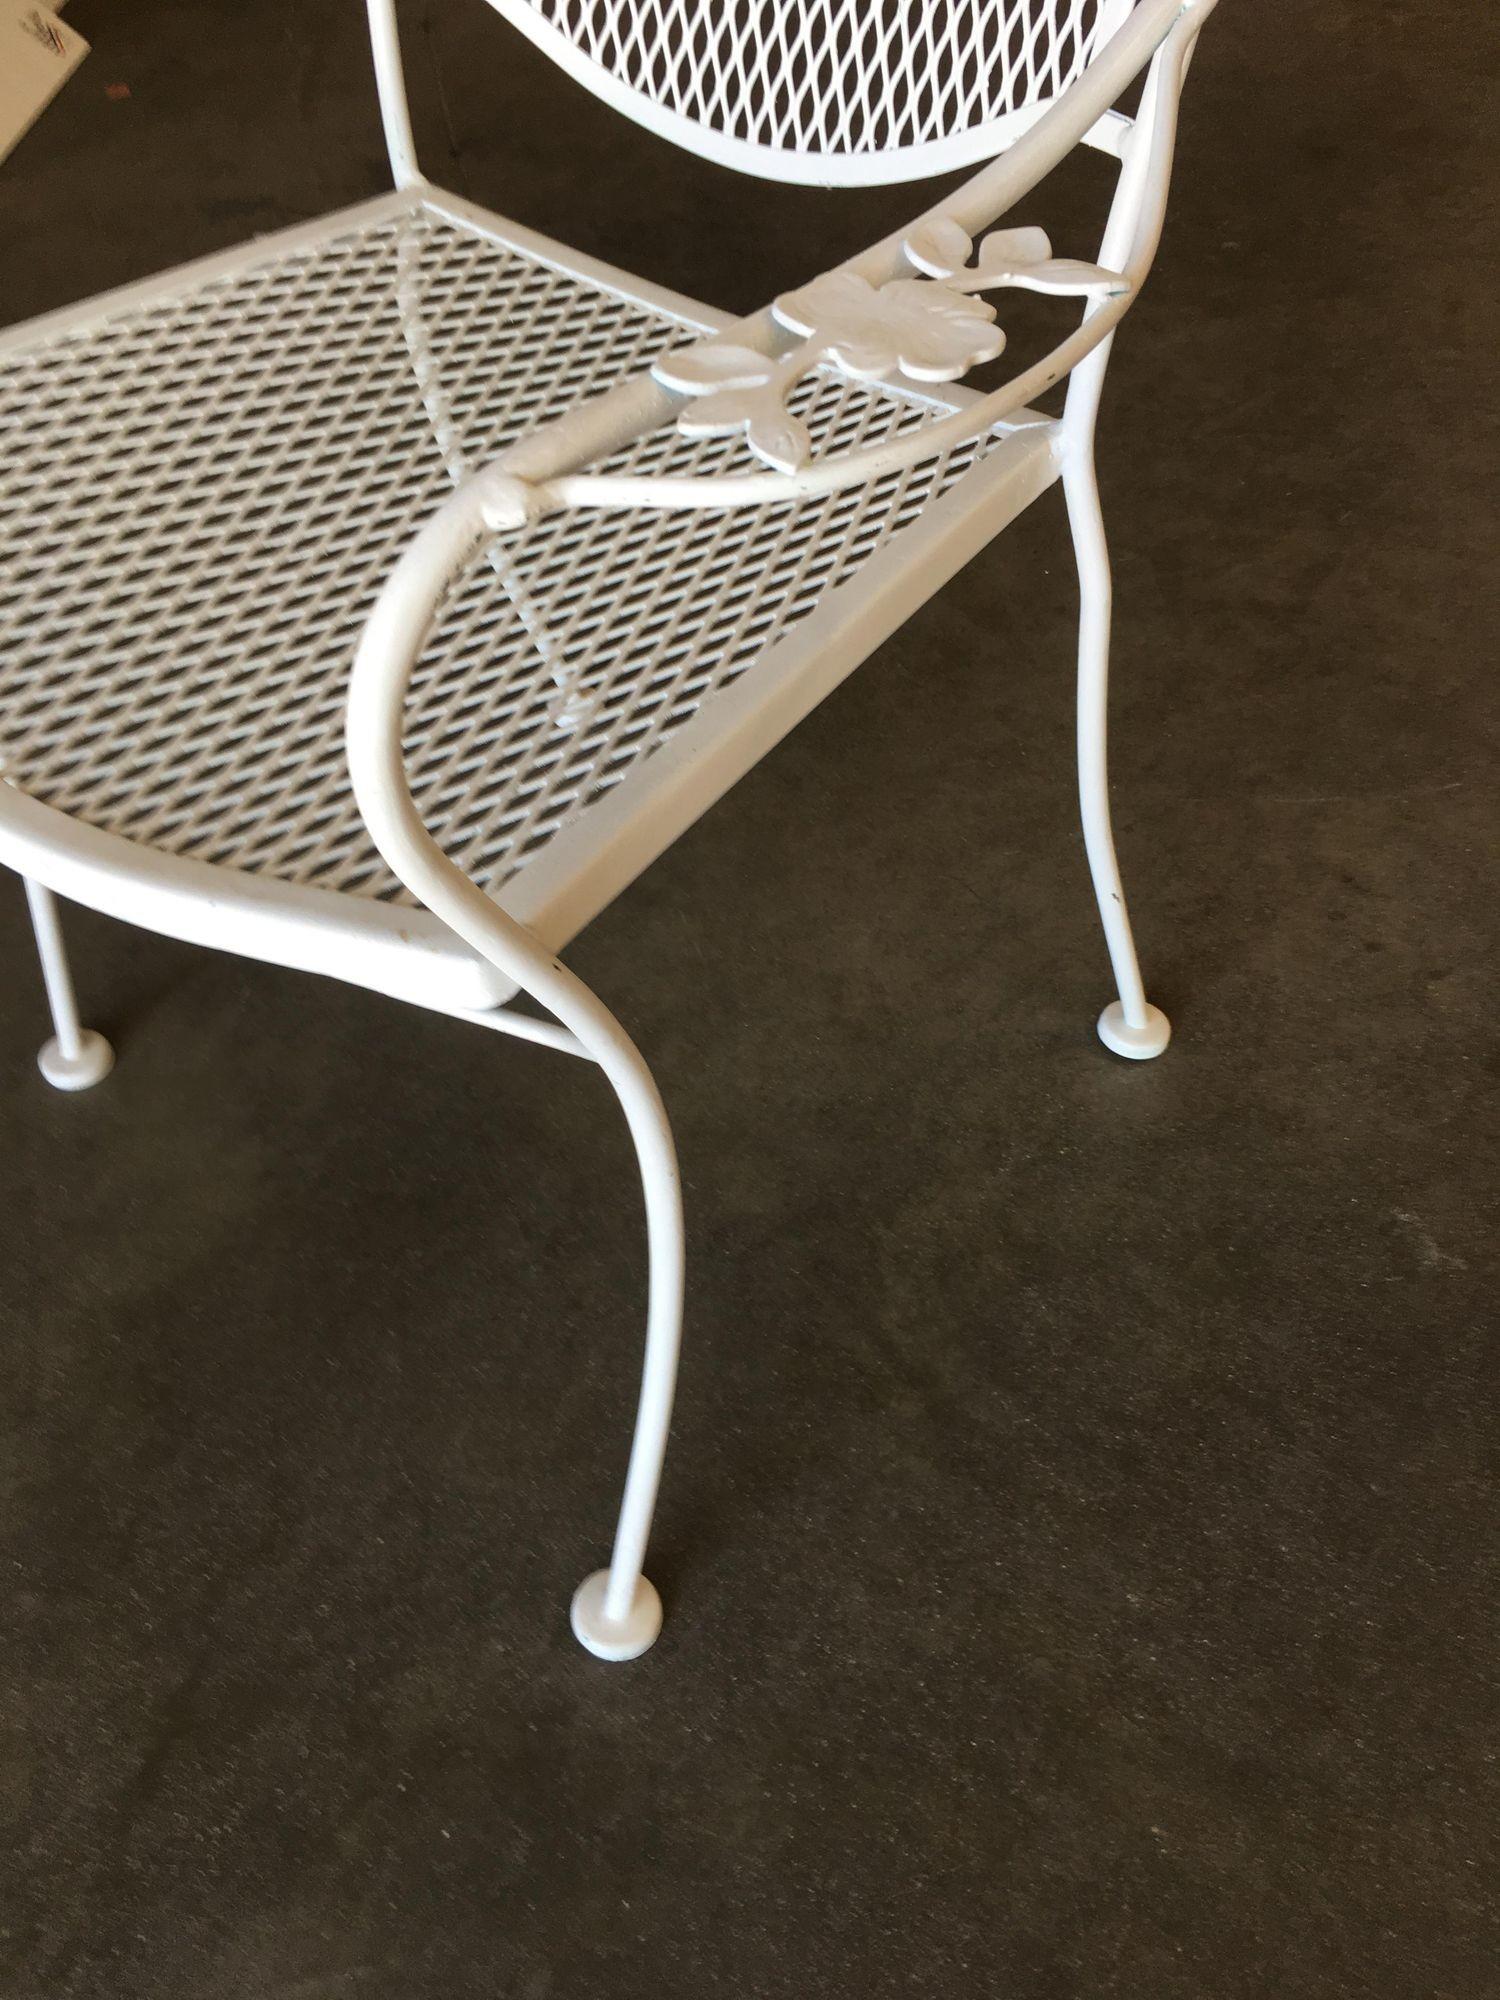 Mid-Century Modern Woodard Company Mesh Outdoor Patio Lounge Chair with Leaf Pattern Arms For Sale